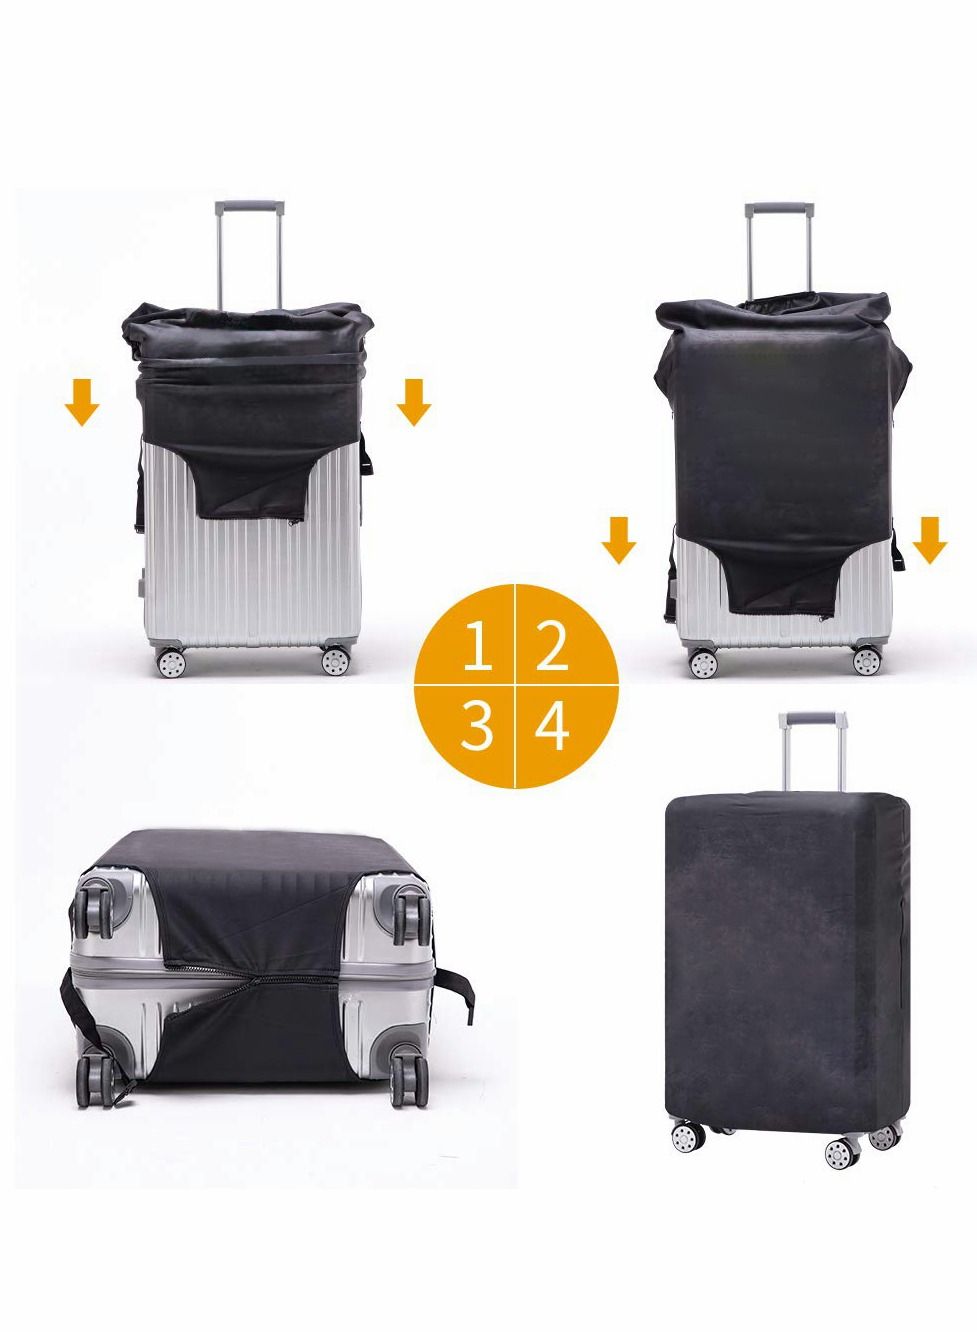 18 20 22 26 28 30 Inch Luggage Cover Protector Bag PVC Clear Plastic  Suitcase ^ | eBay